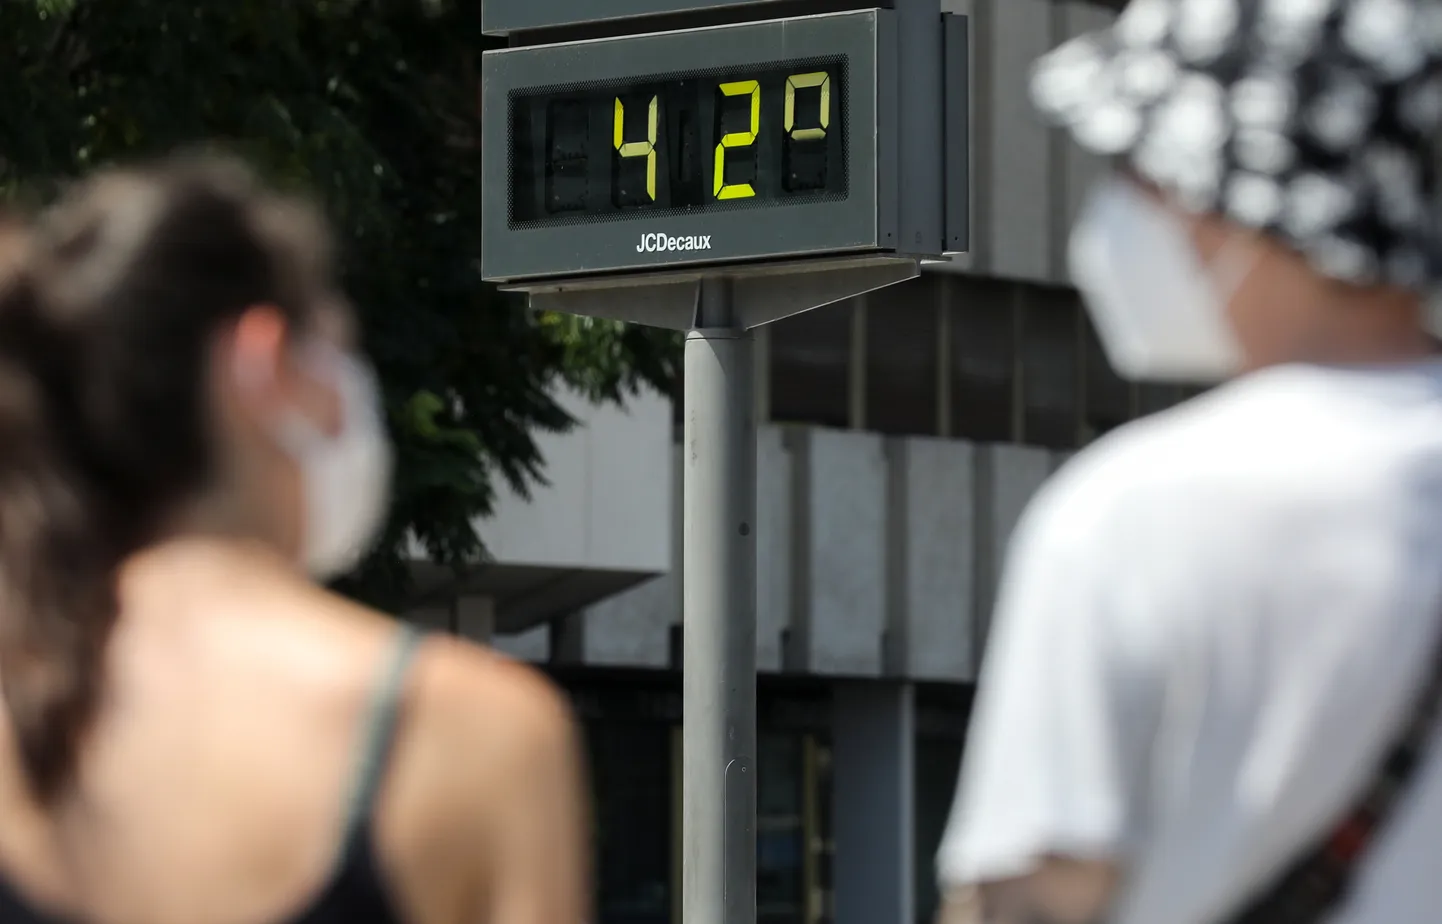 epa08577147 A thermometer reads 42 degrees Celsius in Valencia, Spain, 31 July 2020. Warnings have been issued in different regions due to hot weather with temperatures over 40 degrees Celsius.  EPA/Ana Escobar